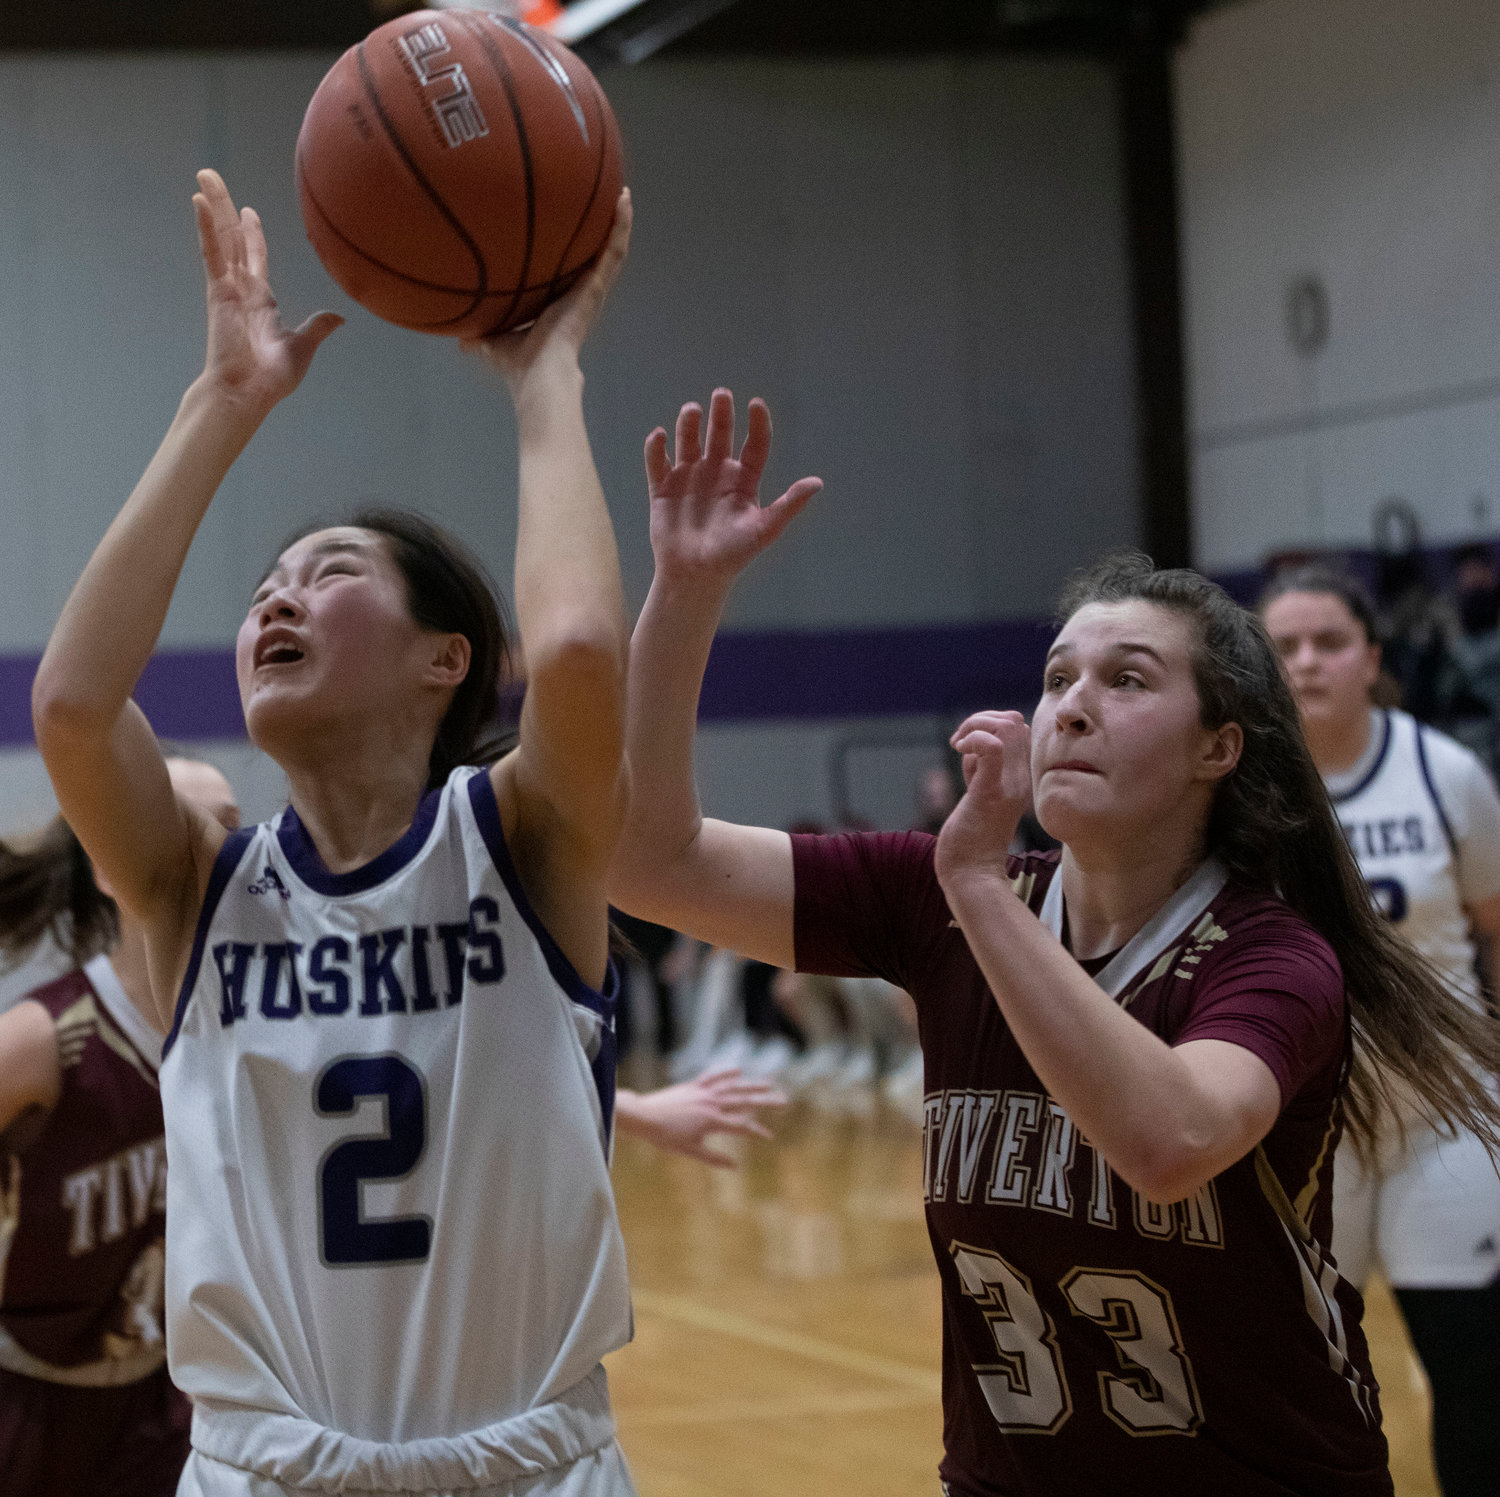 Huskies guard Elsa White drives in for a layup with Tigers forward Abbie Monkevicz defending.